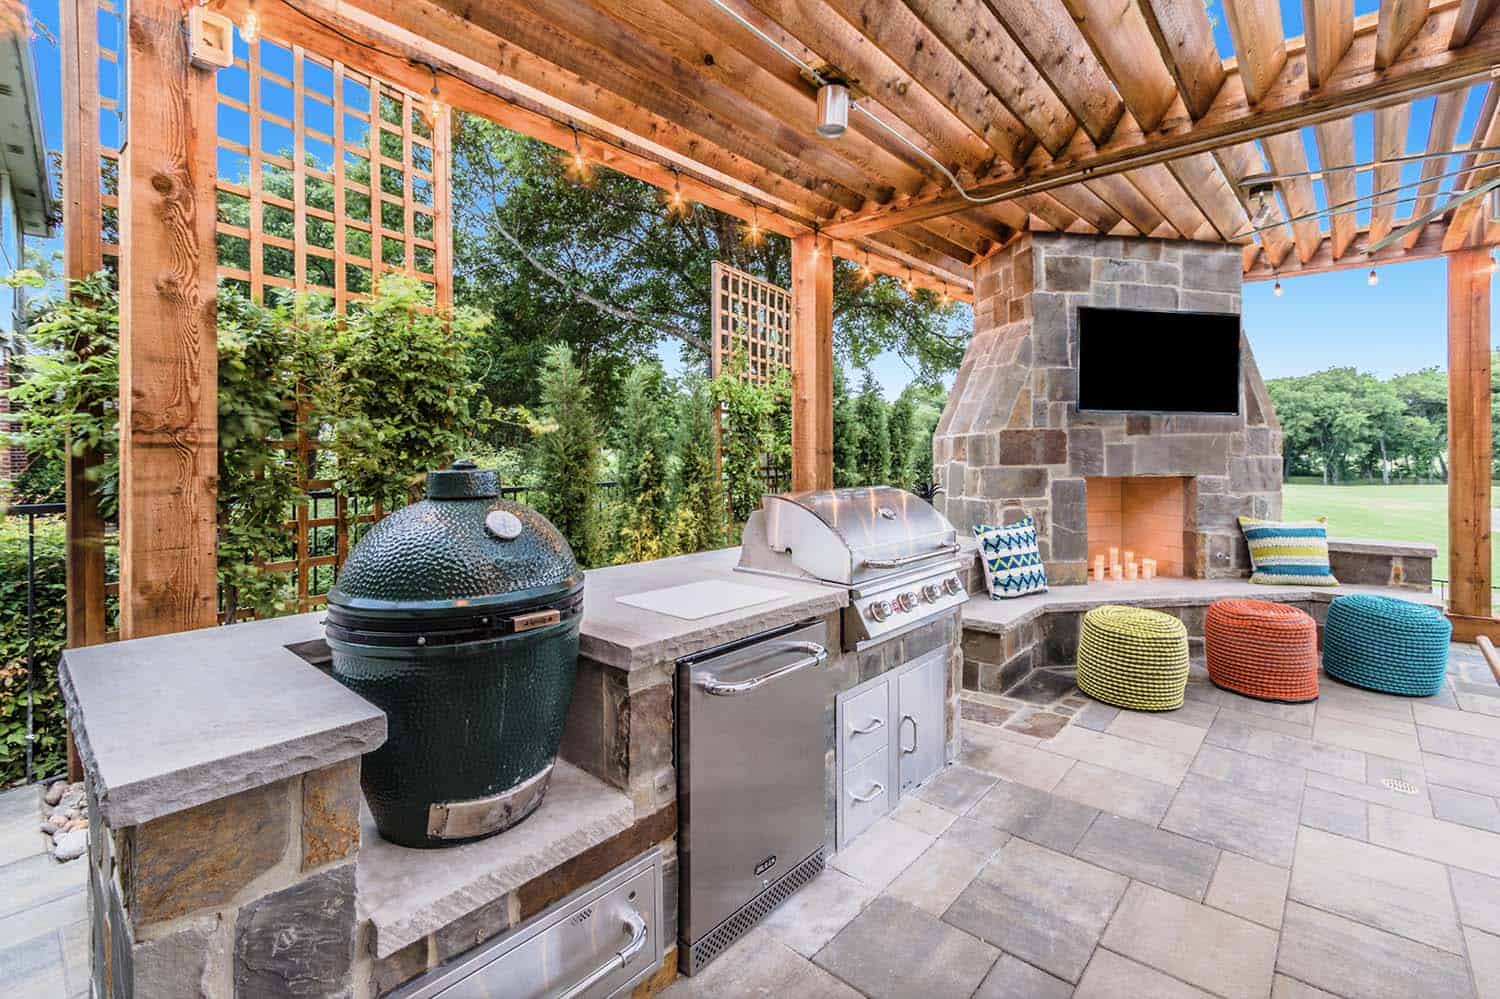 large-outdoor-entertaining-area-with-a-grill-fireplace-and-pergola